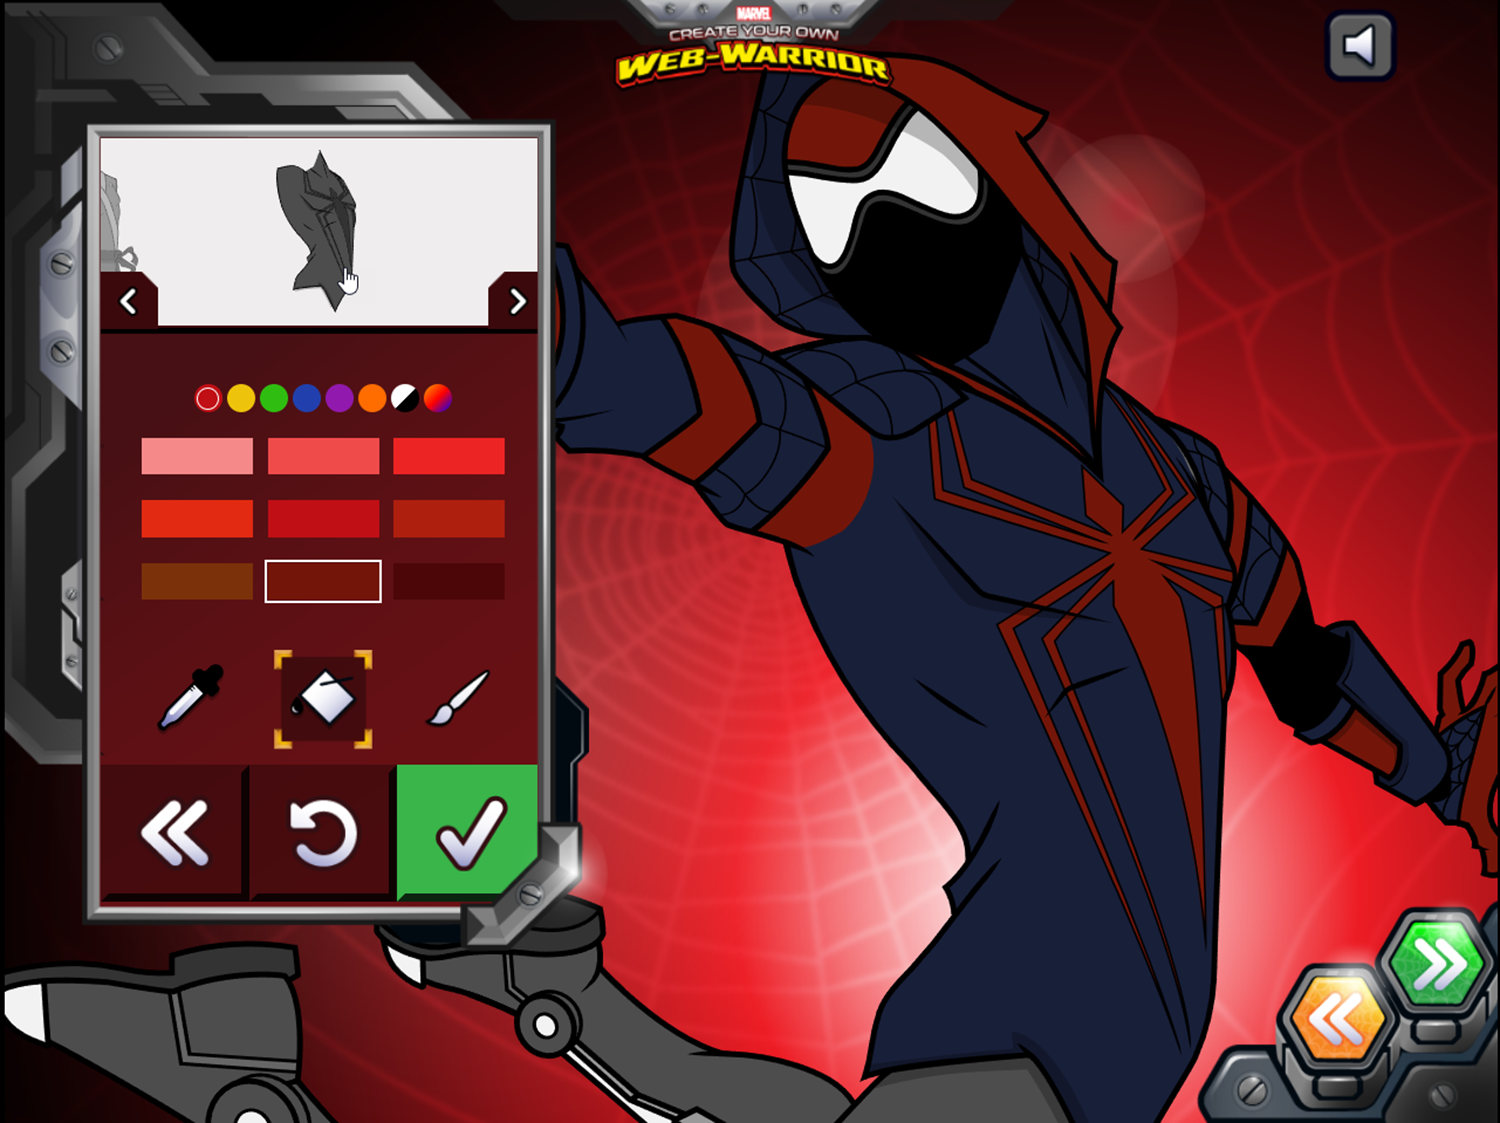 Spider-Man Create Your Own Web-Warrior Game Designing Character Screenshot.